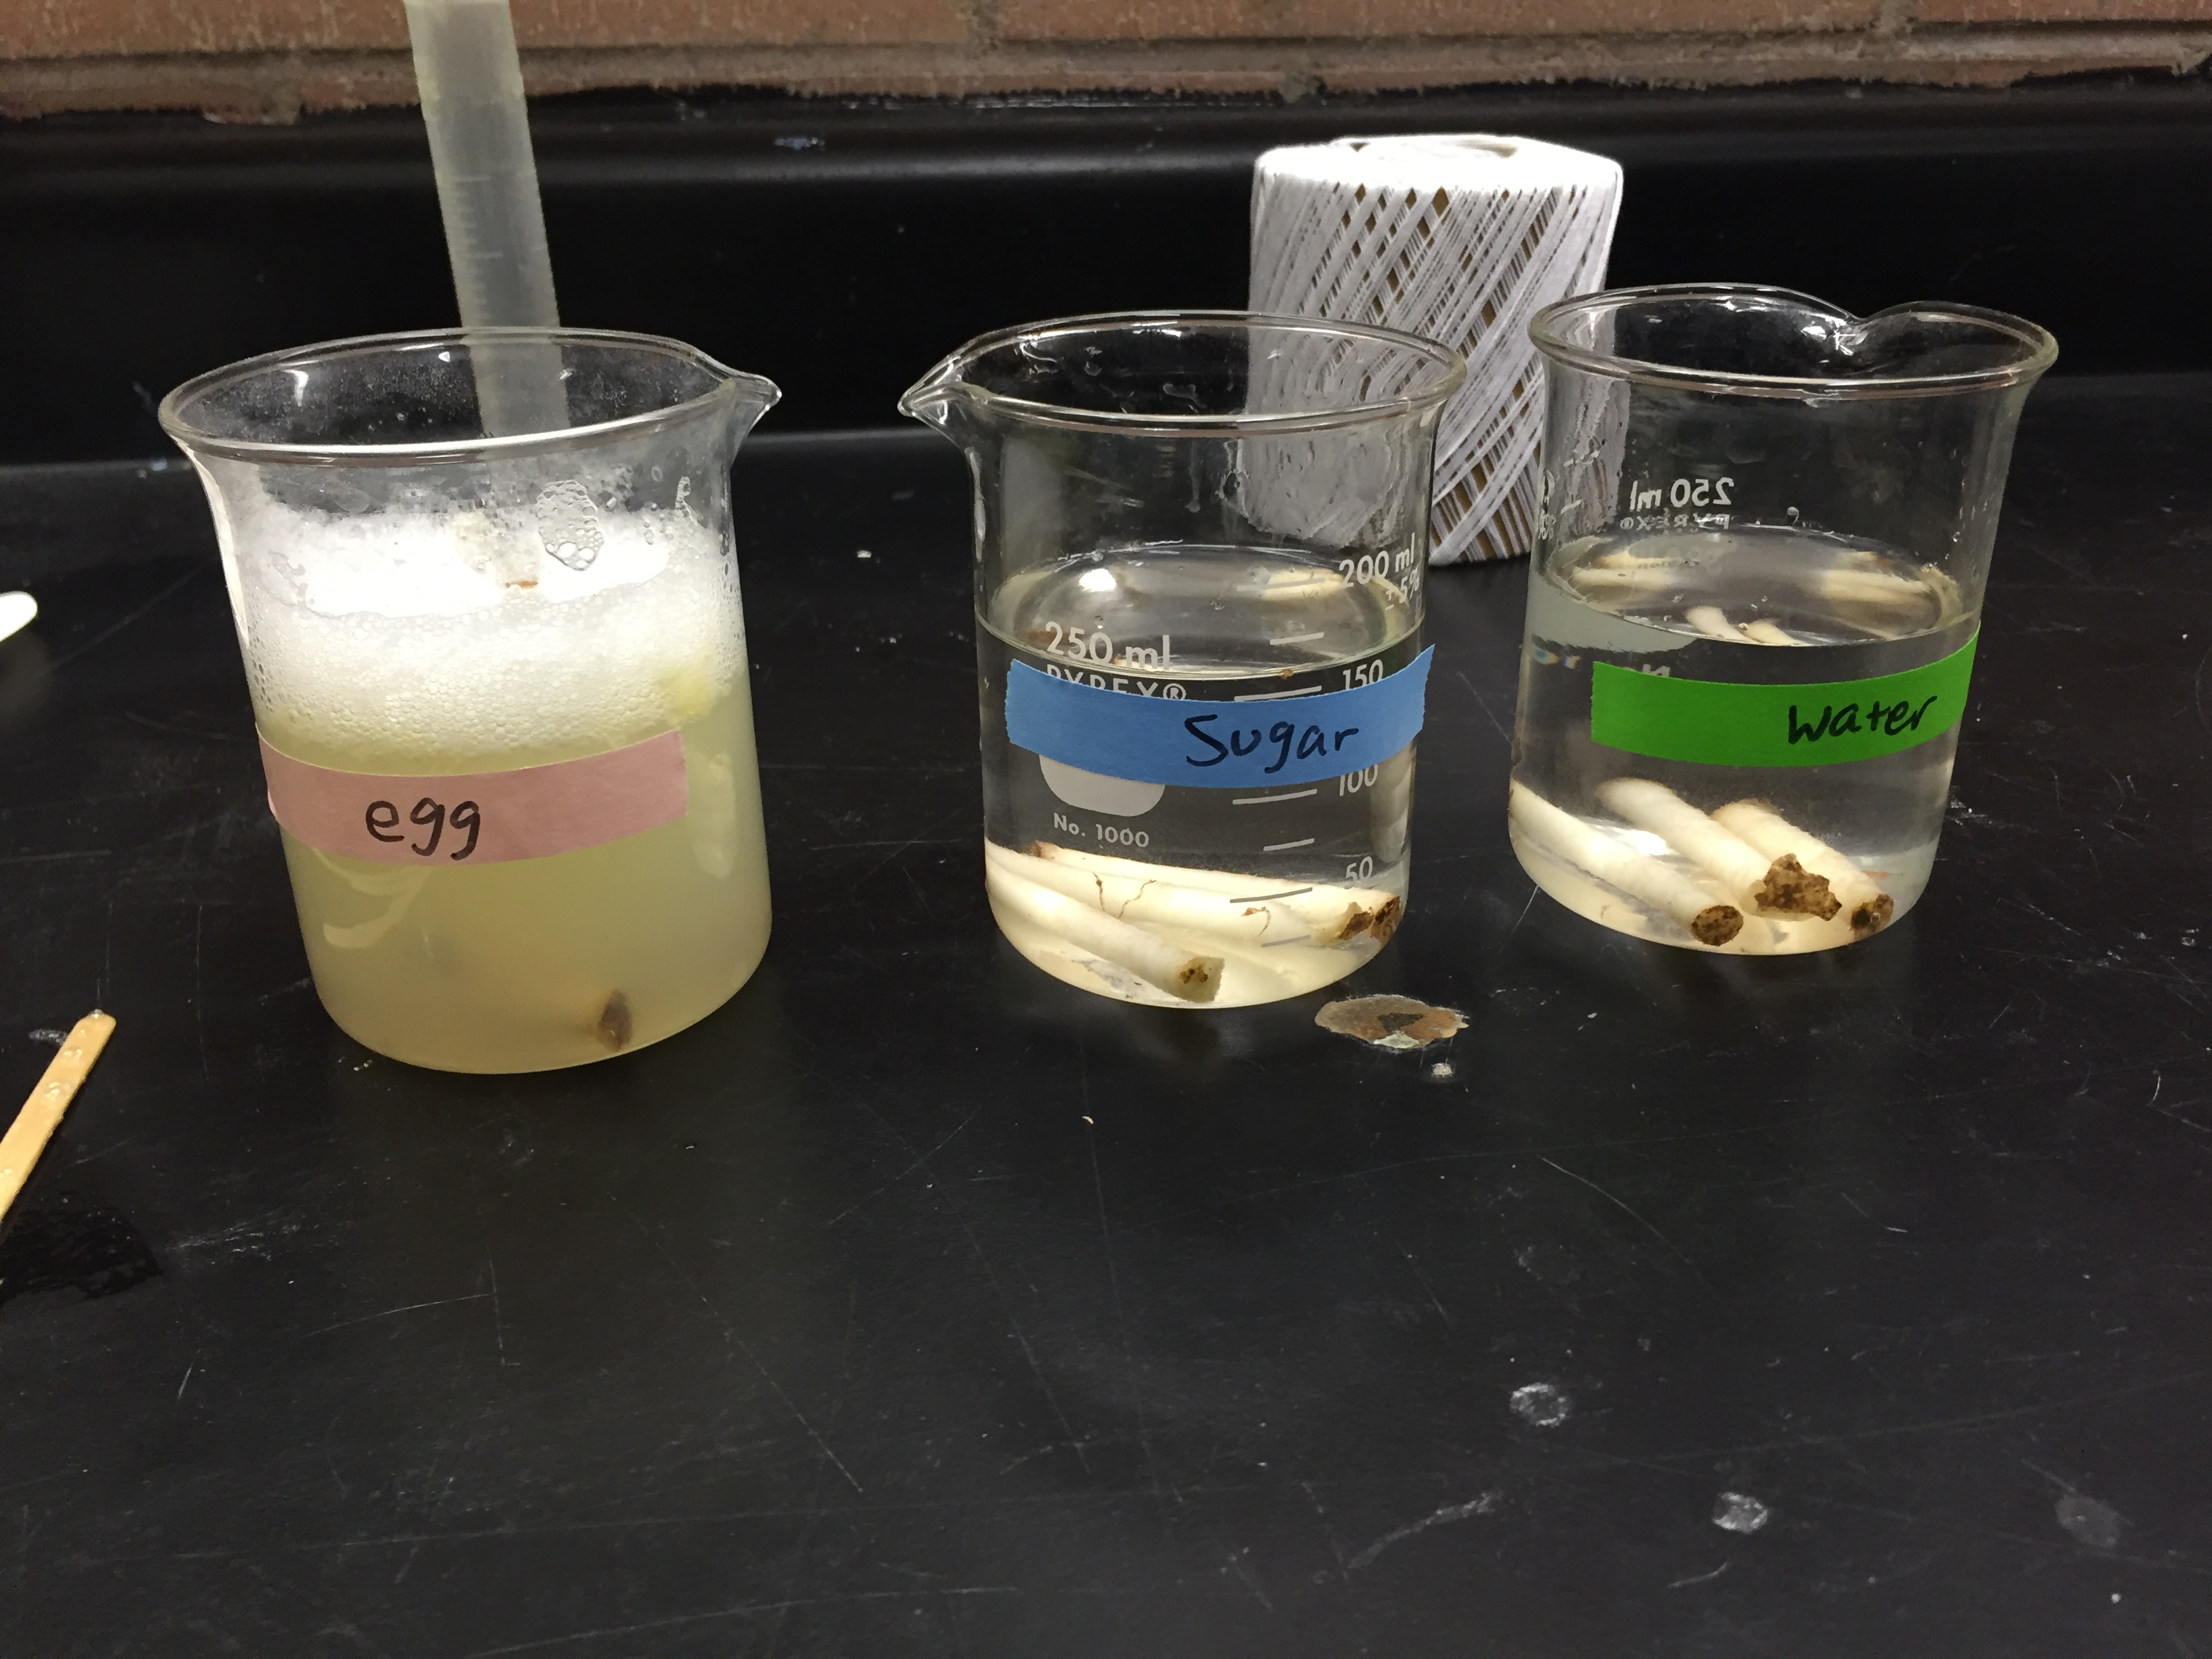 How do you do a lab for osmosis with potatoes?